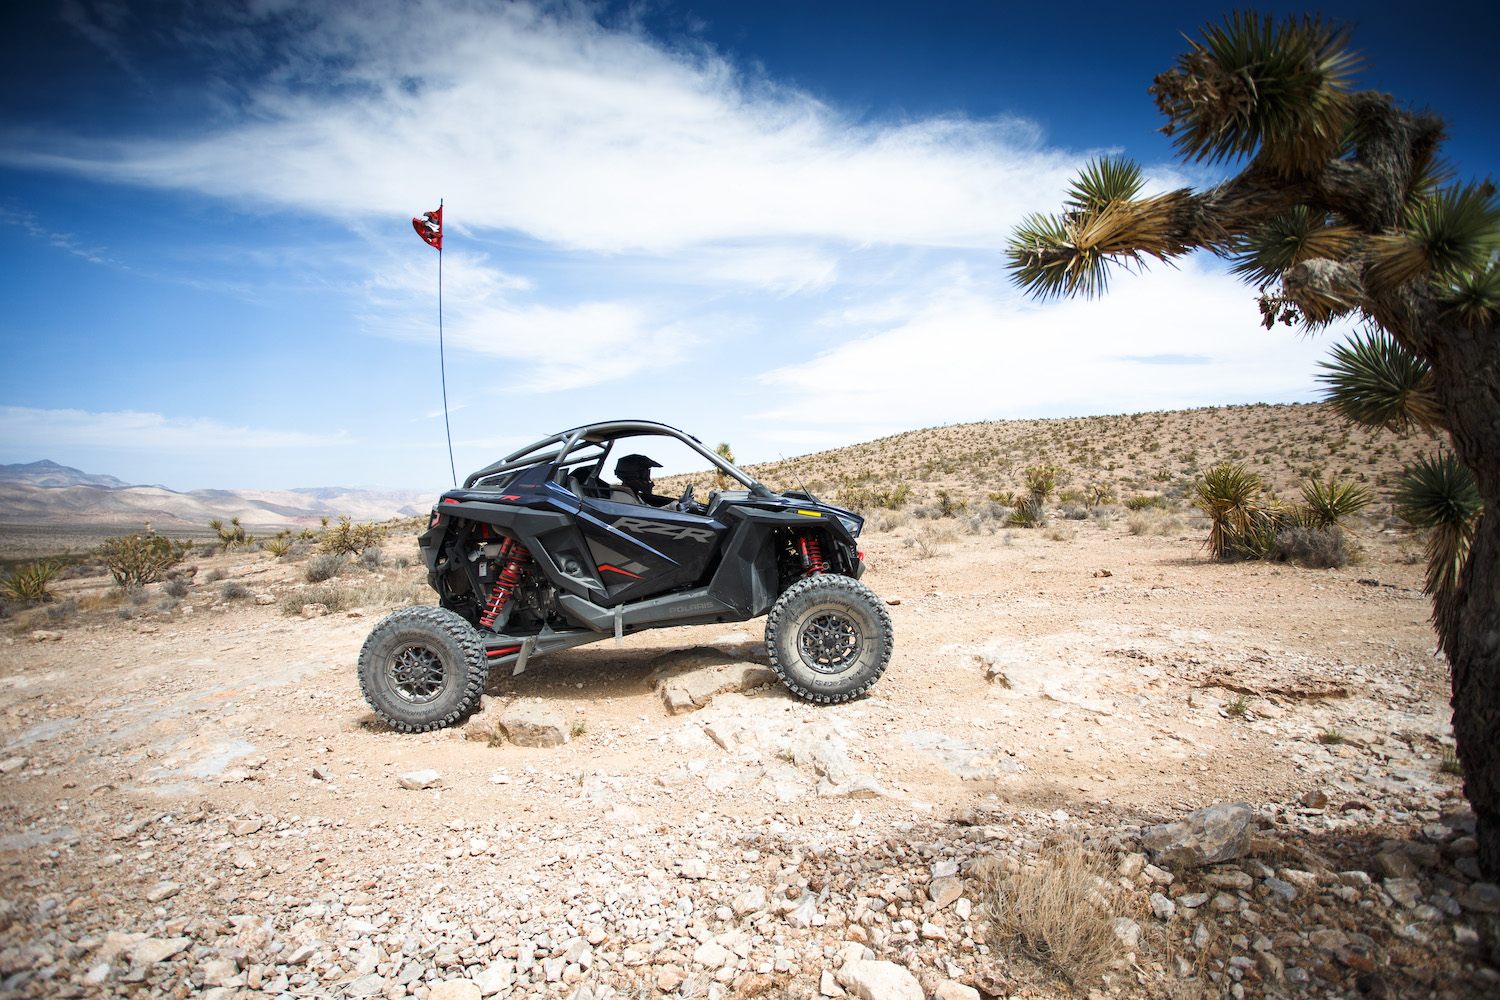 Side angle of Polaris RZR Pro R on a dirt path in the desert driving up a dirt path.